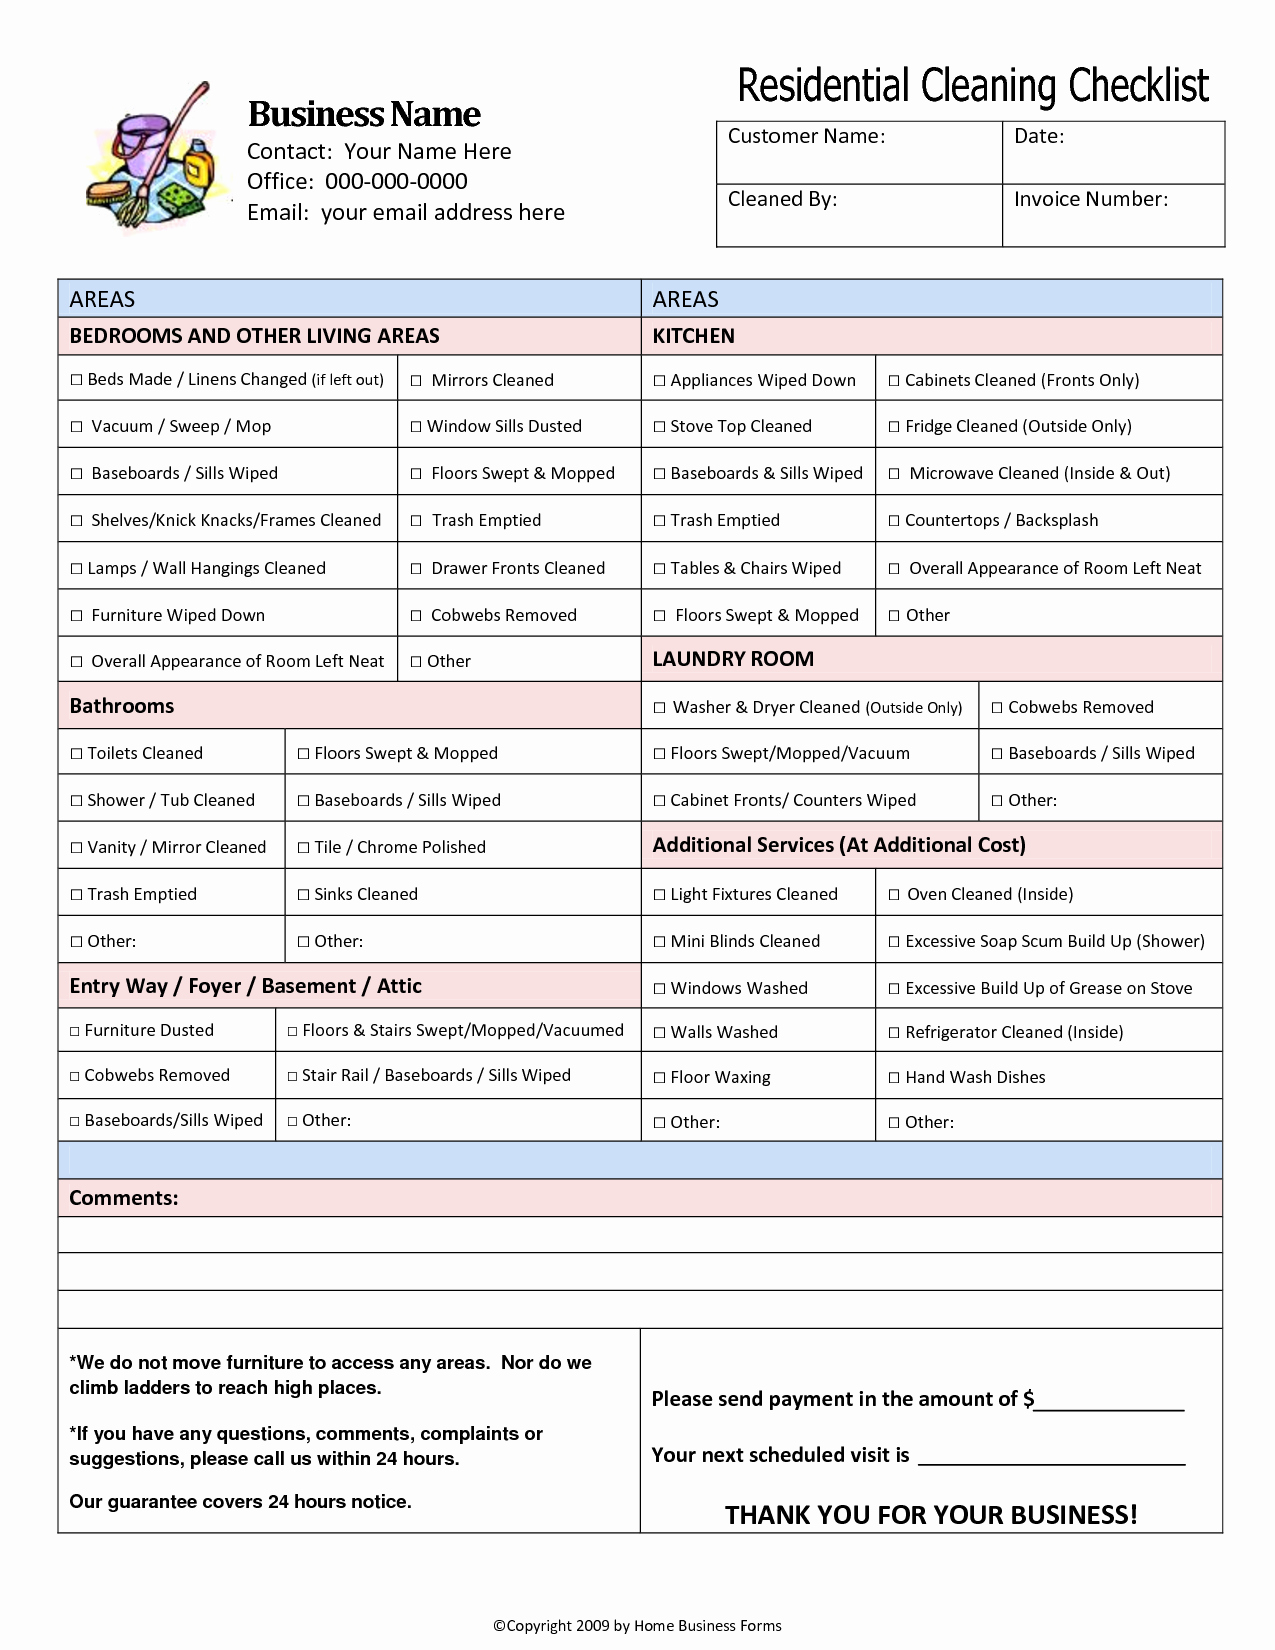 Apartment Cleaning Schedule Template Unique Residential House Cleaning Checklist